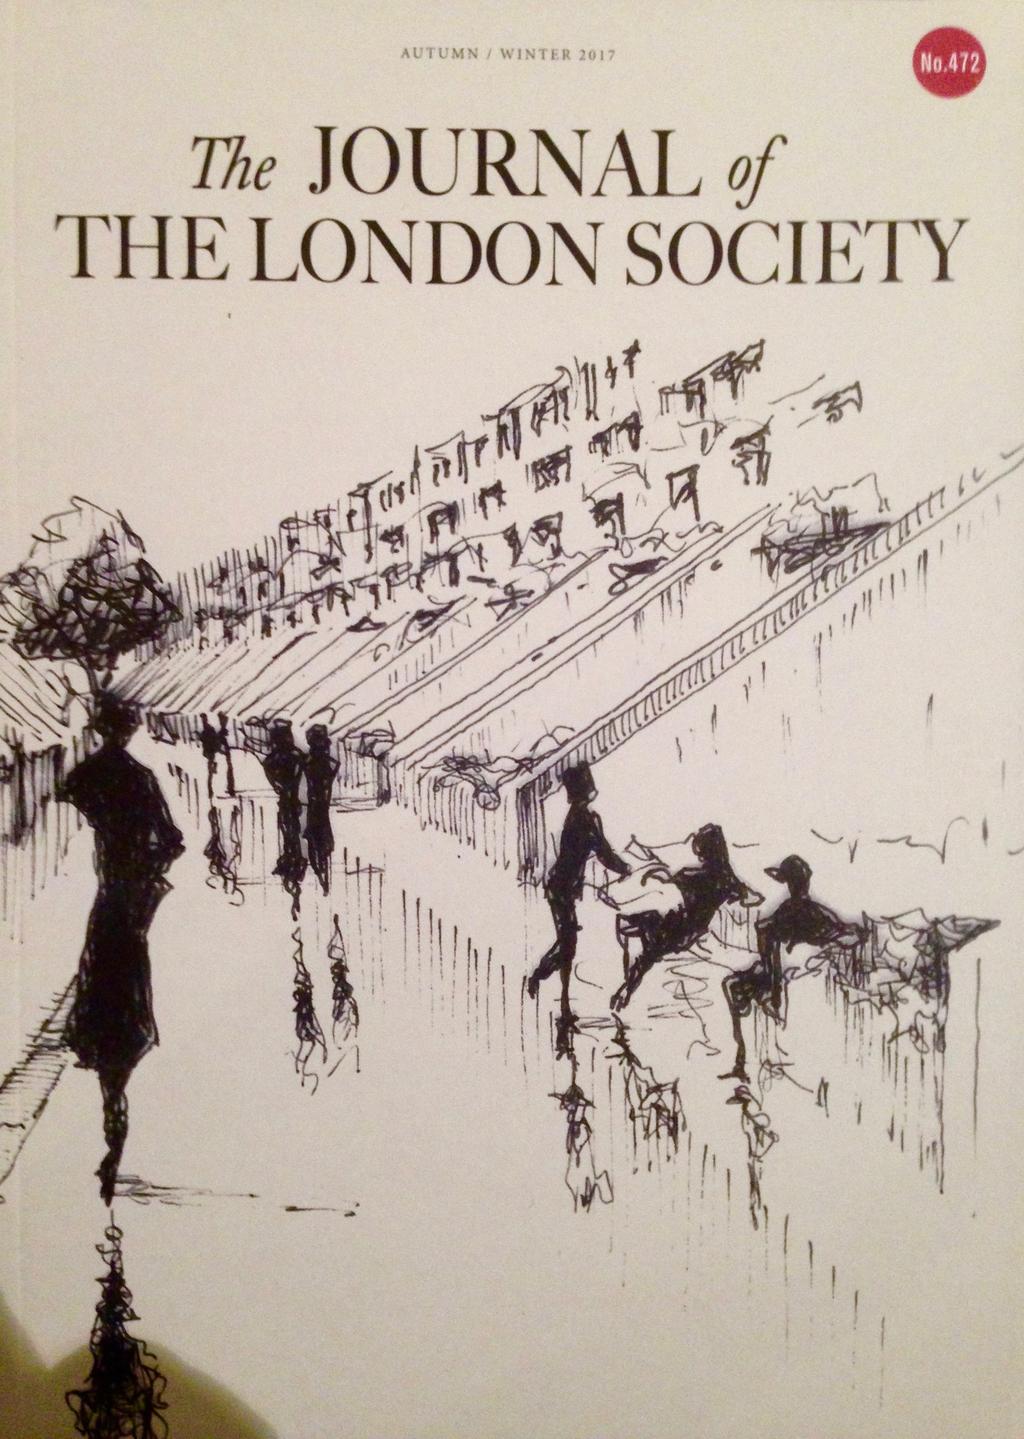 THE JOURNAL The Journal of the London Society looks at what is happening in contemporary London with opinion pieces on the challenges facing the city, features on interesting buildings, profiles of